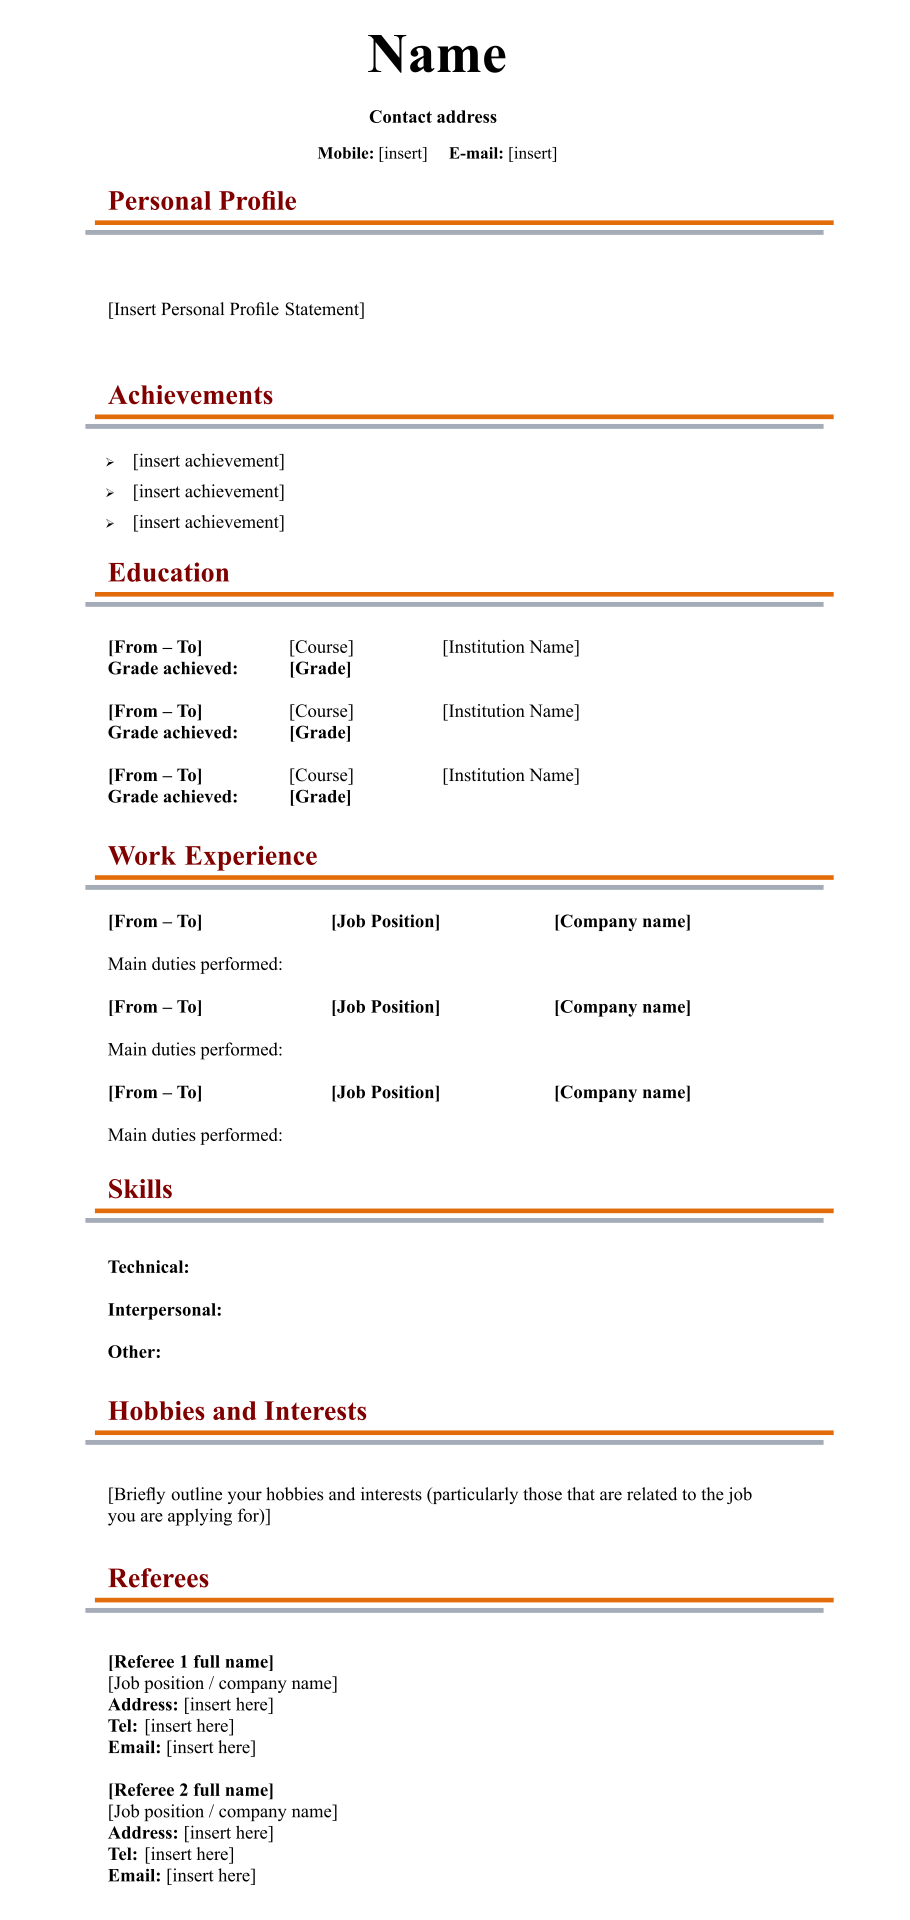 Blank resume templates free nationjord